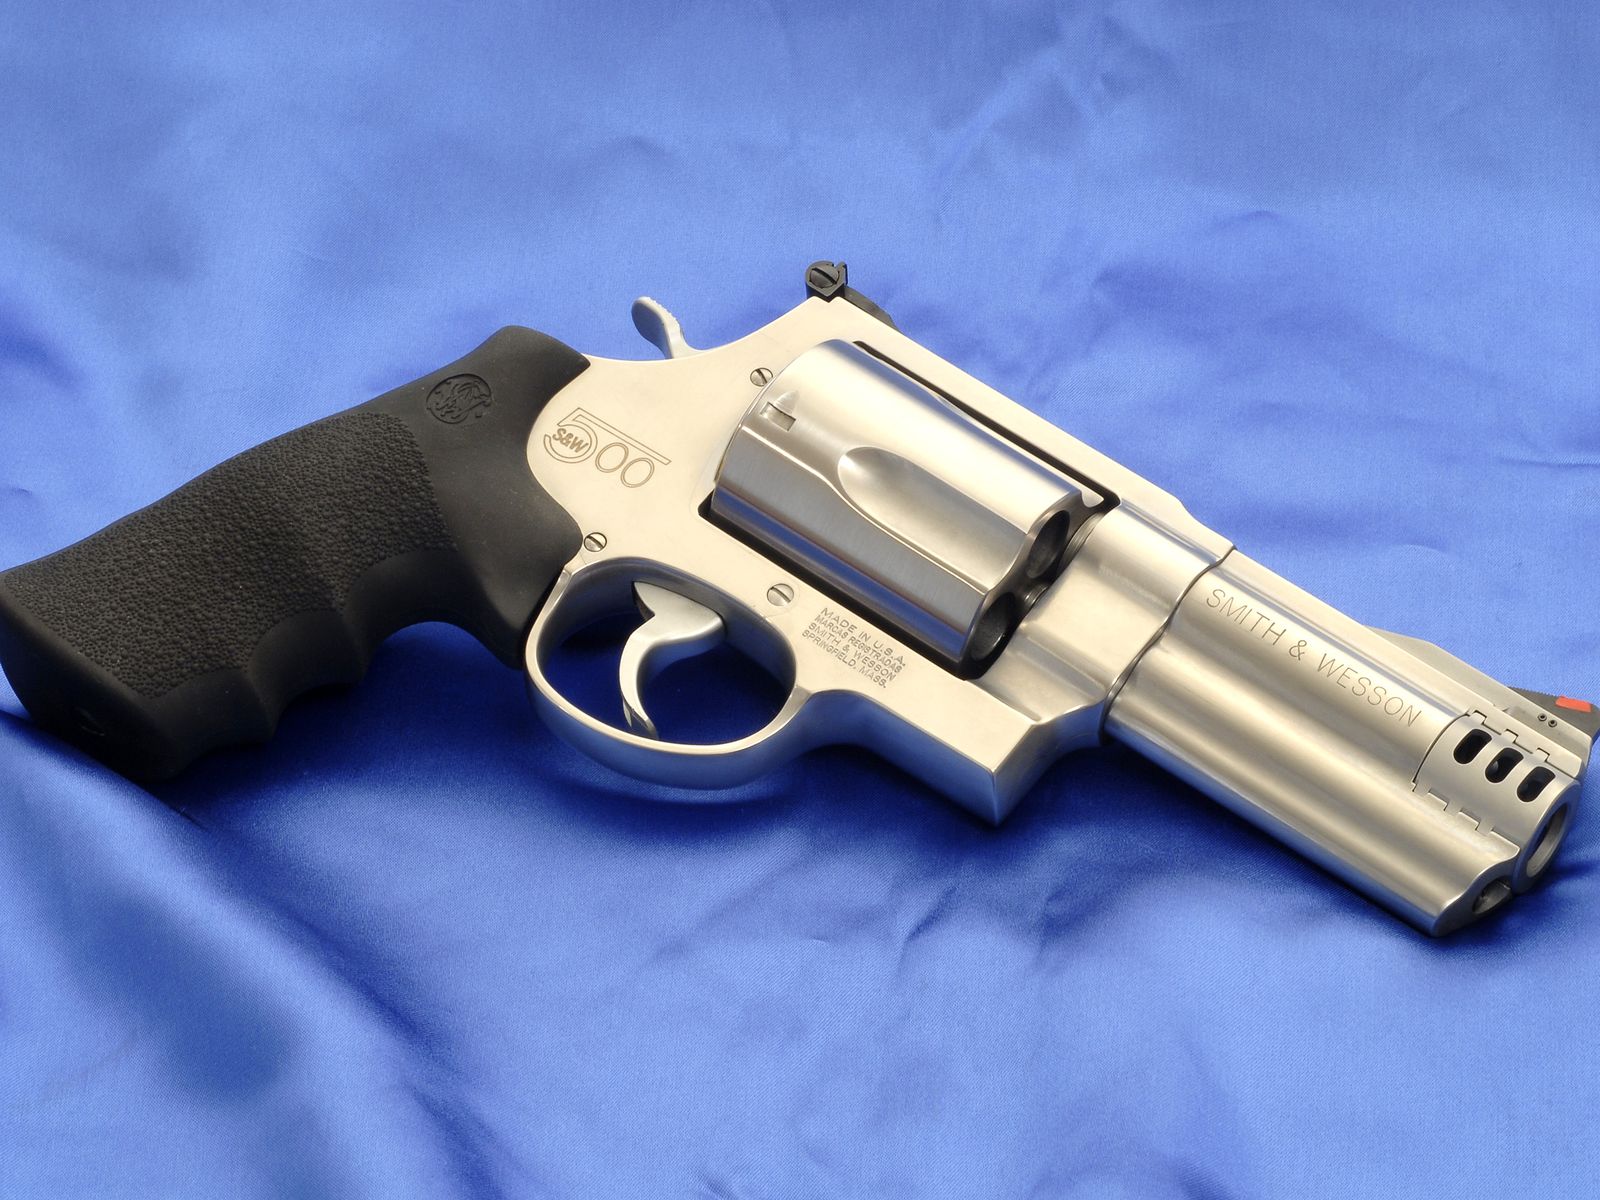 Smith & Wesson Revolver Computer Wallpapers, Desktop Backgrounds ...